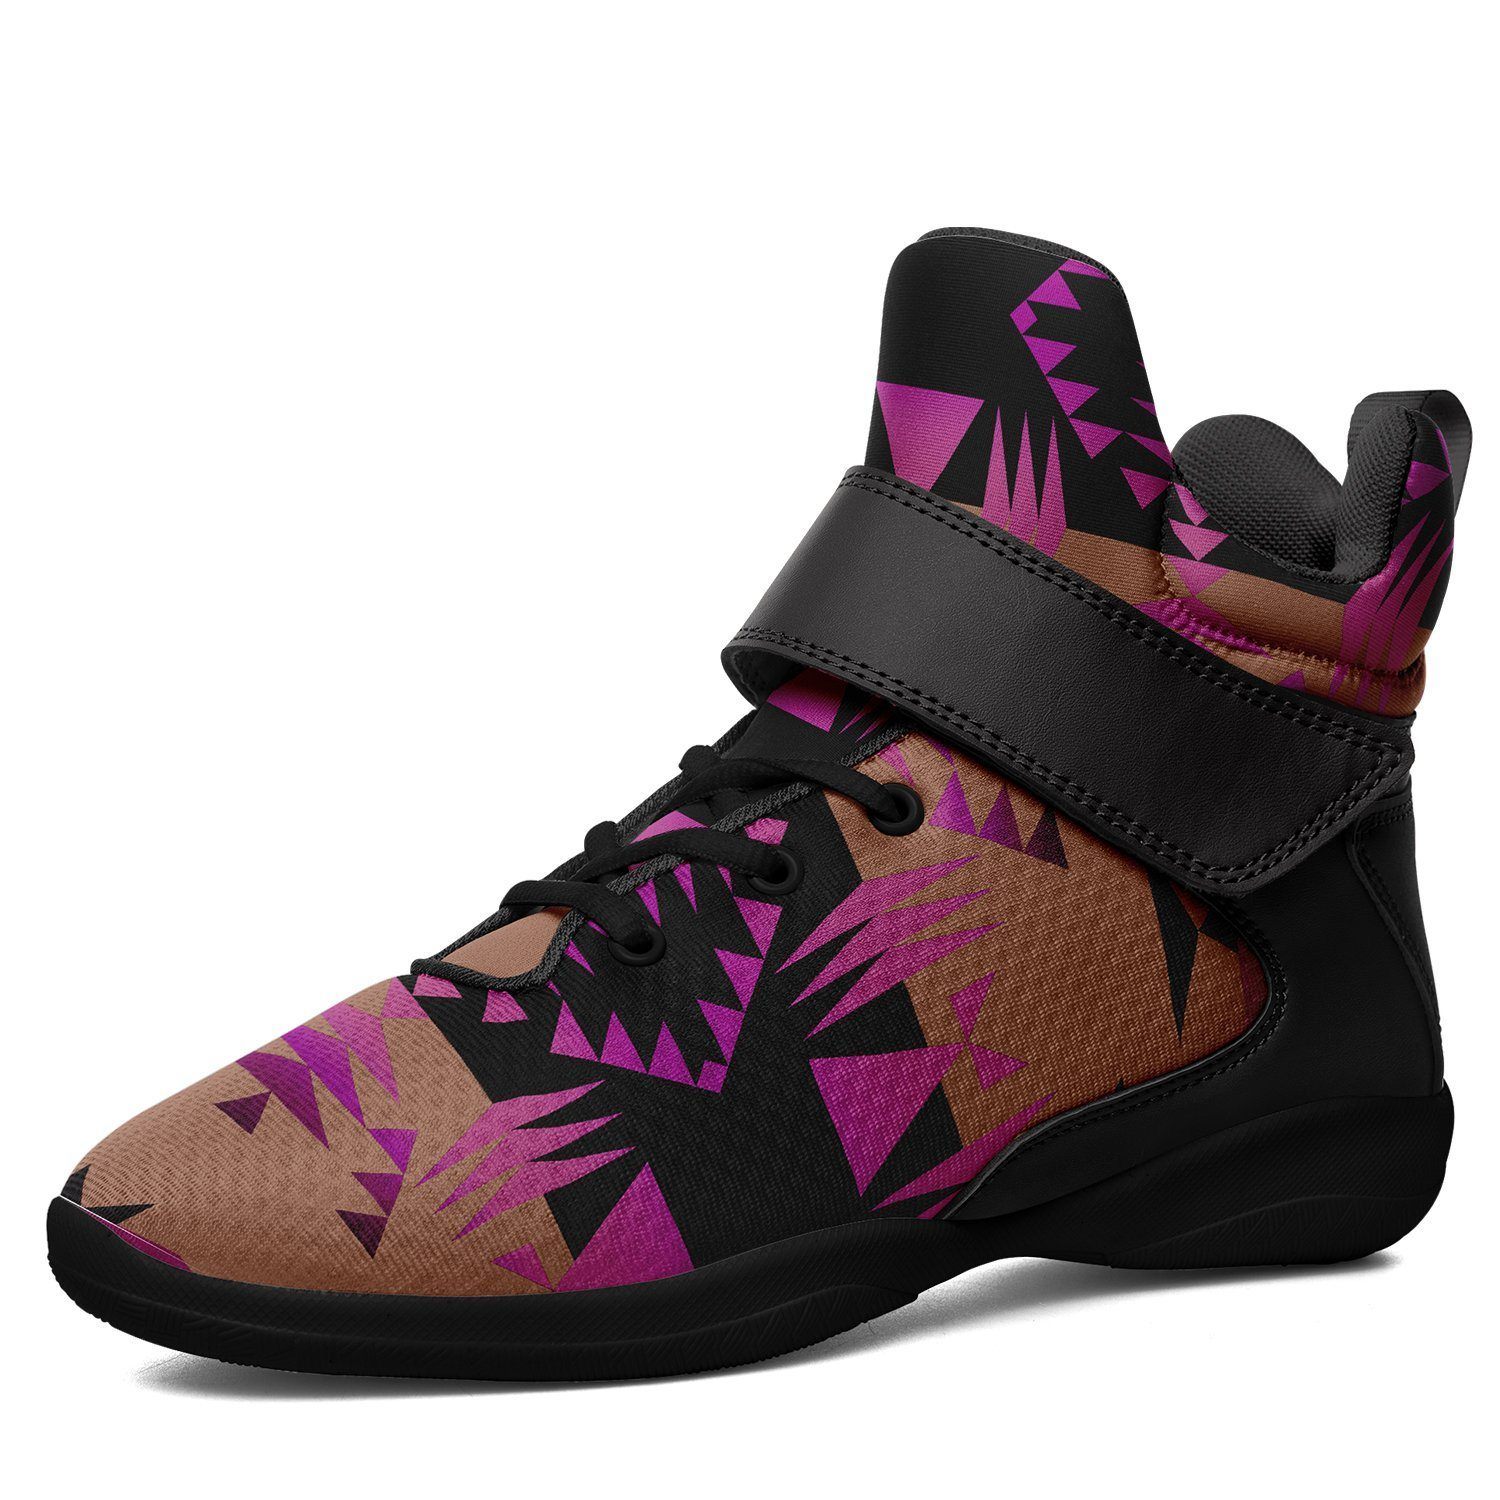 Between the Mountains Berry Ipottaa Basketball / Sport High Top Shoes - Black Sole 49 Dzine US Men 7 / EUR 40 Black Sole with Black Strap 